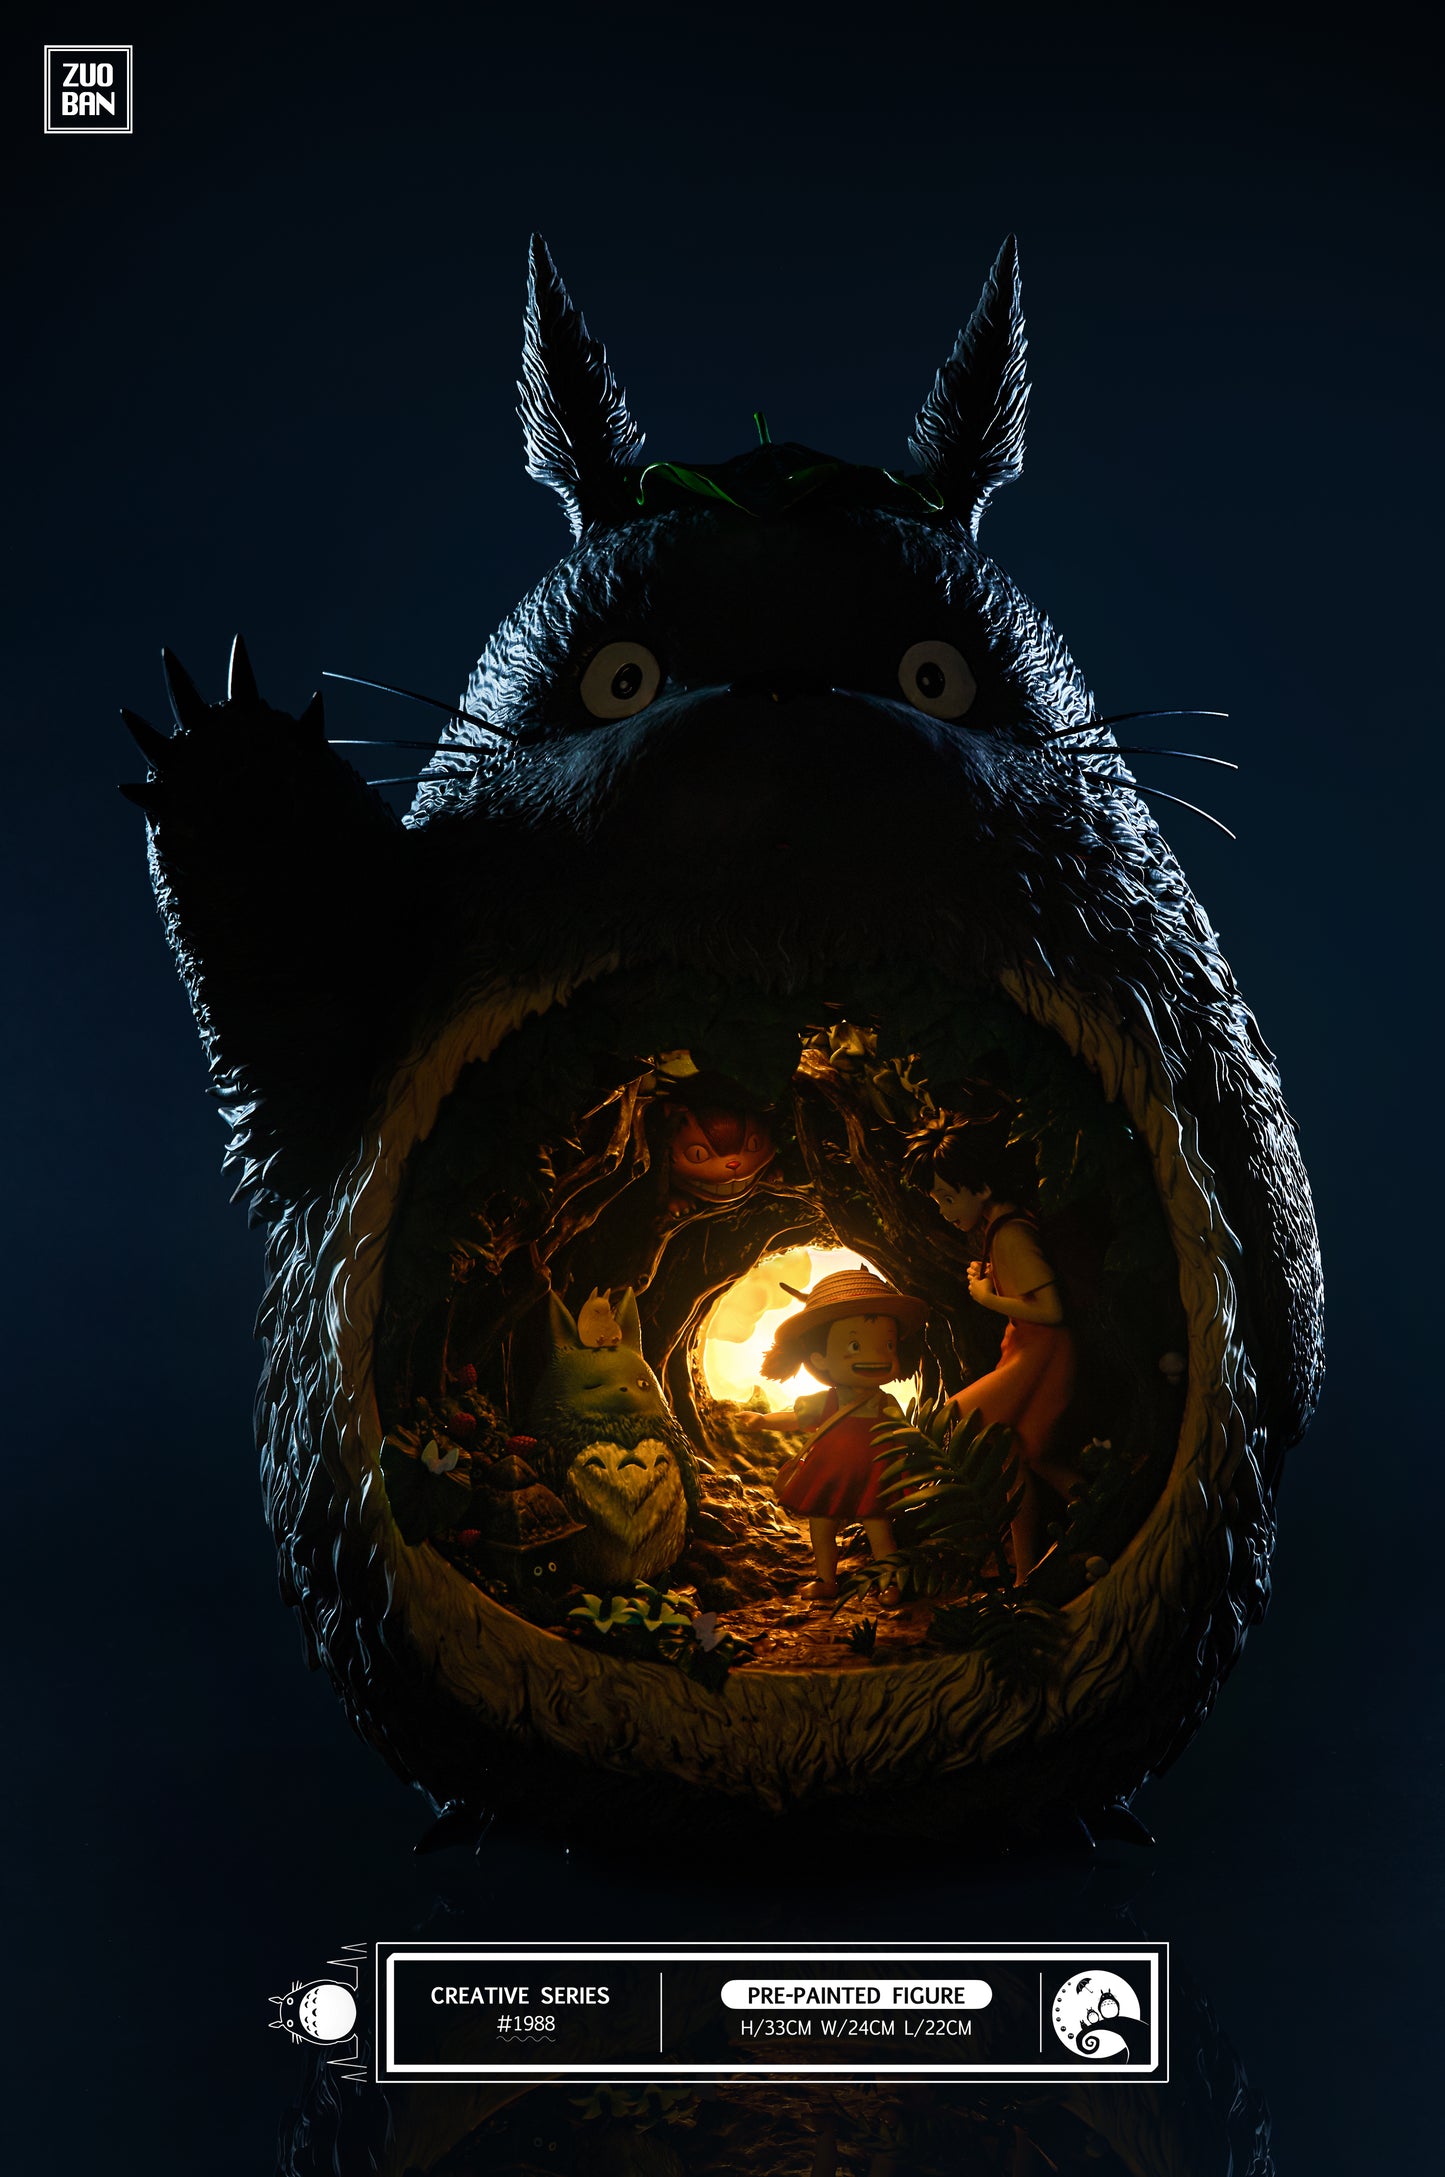 ZUO BAN STUDIO – CREATIVE SERIES #1988 MY NEIGHBOR TOTORO [SOLD OUT]